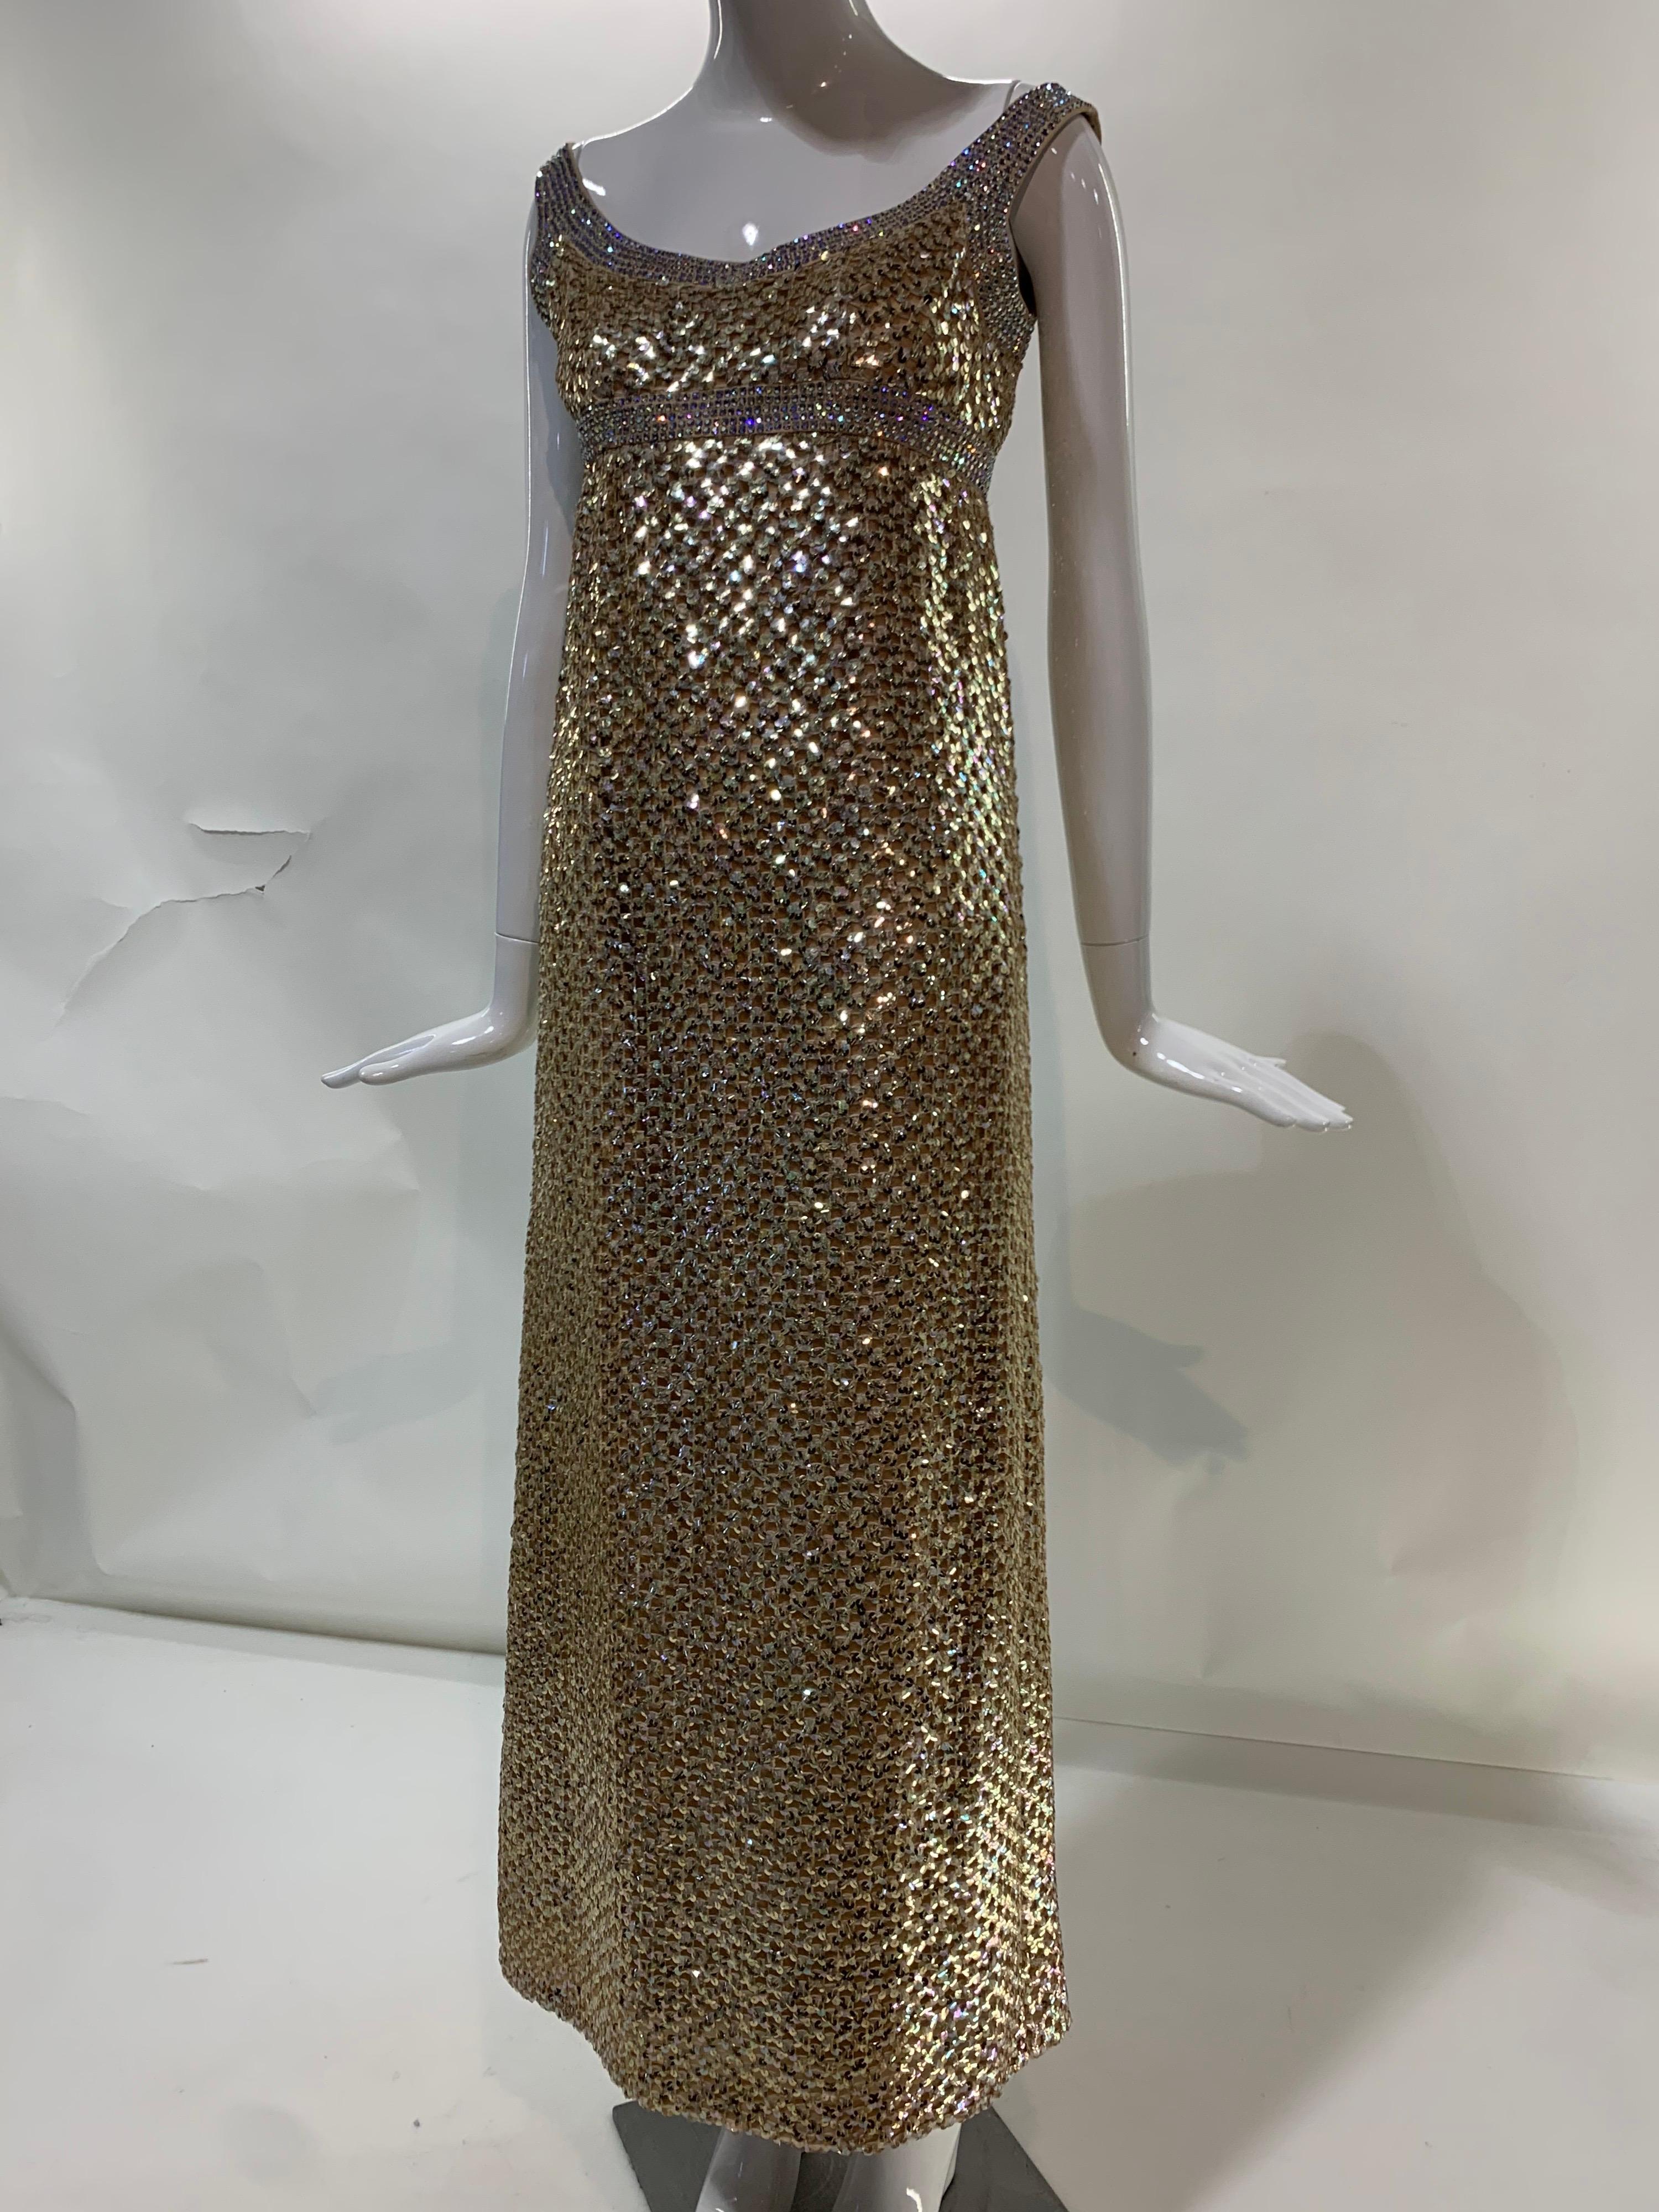 1960s Mod Empire Waist Gown in Gold Sequin Lattice and Iridescent Rhinestones For Sale 10